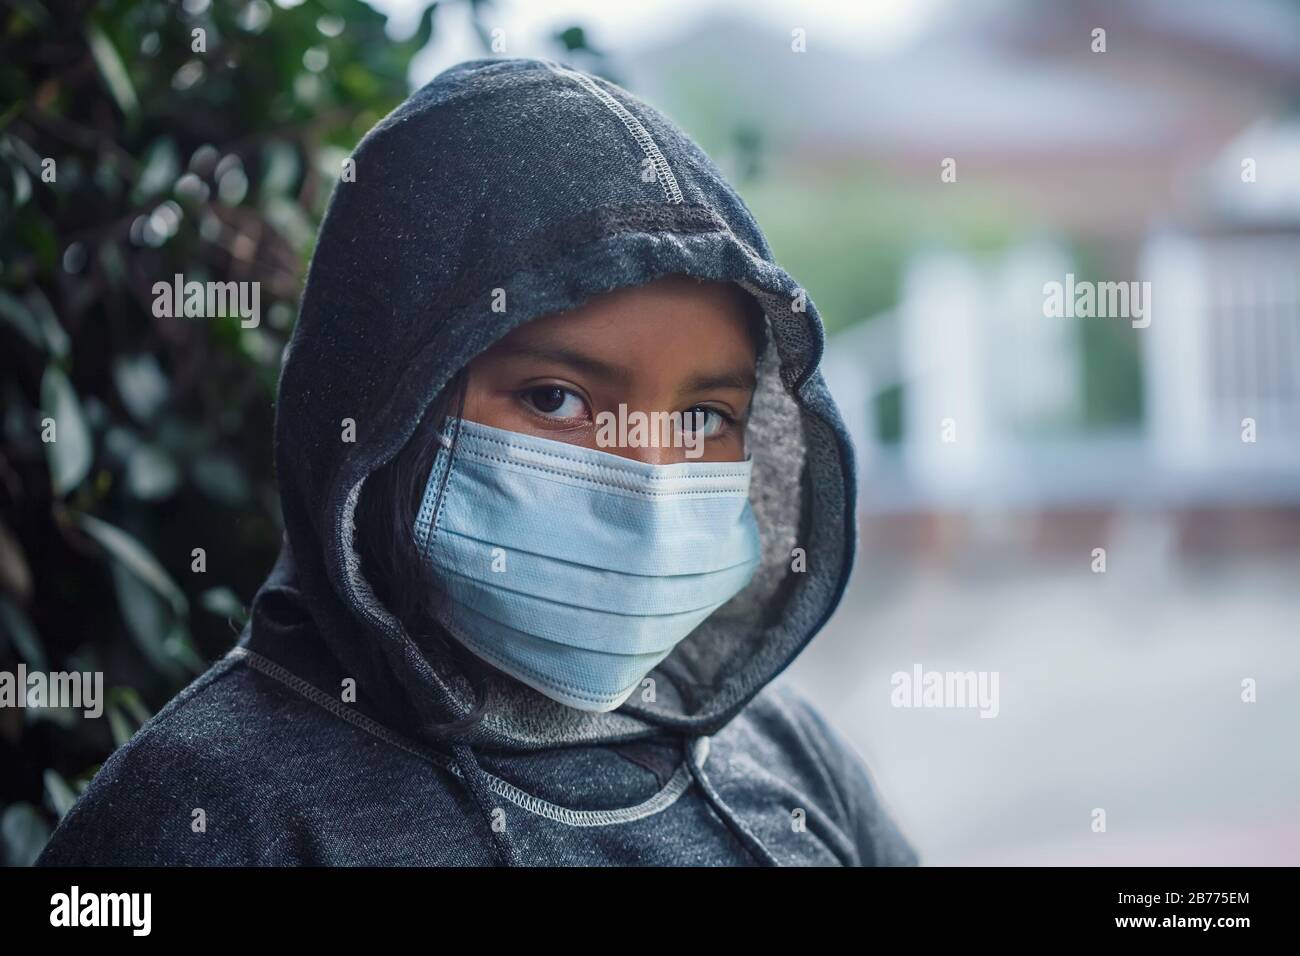 Latino 9 year old girl or student wearing a hoodie sweatshirt and medical face mask to prevent the spread of infectious diseases. Stock Photo